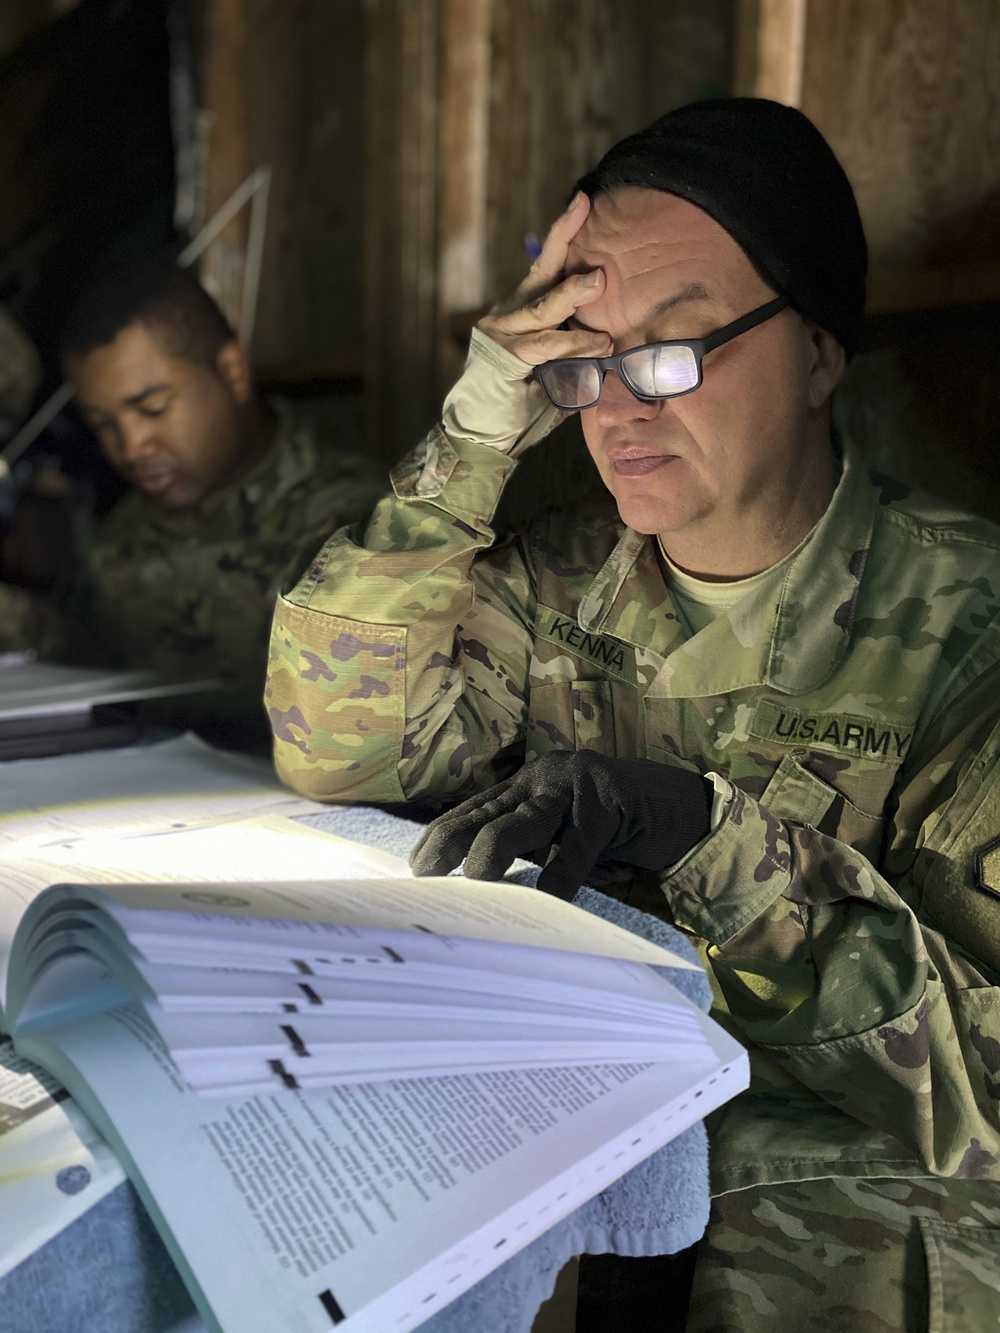 United States Army Legal Command Soldiers Train at Joint Base Lewis-McChord, W.A.